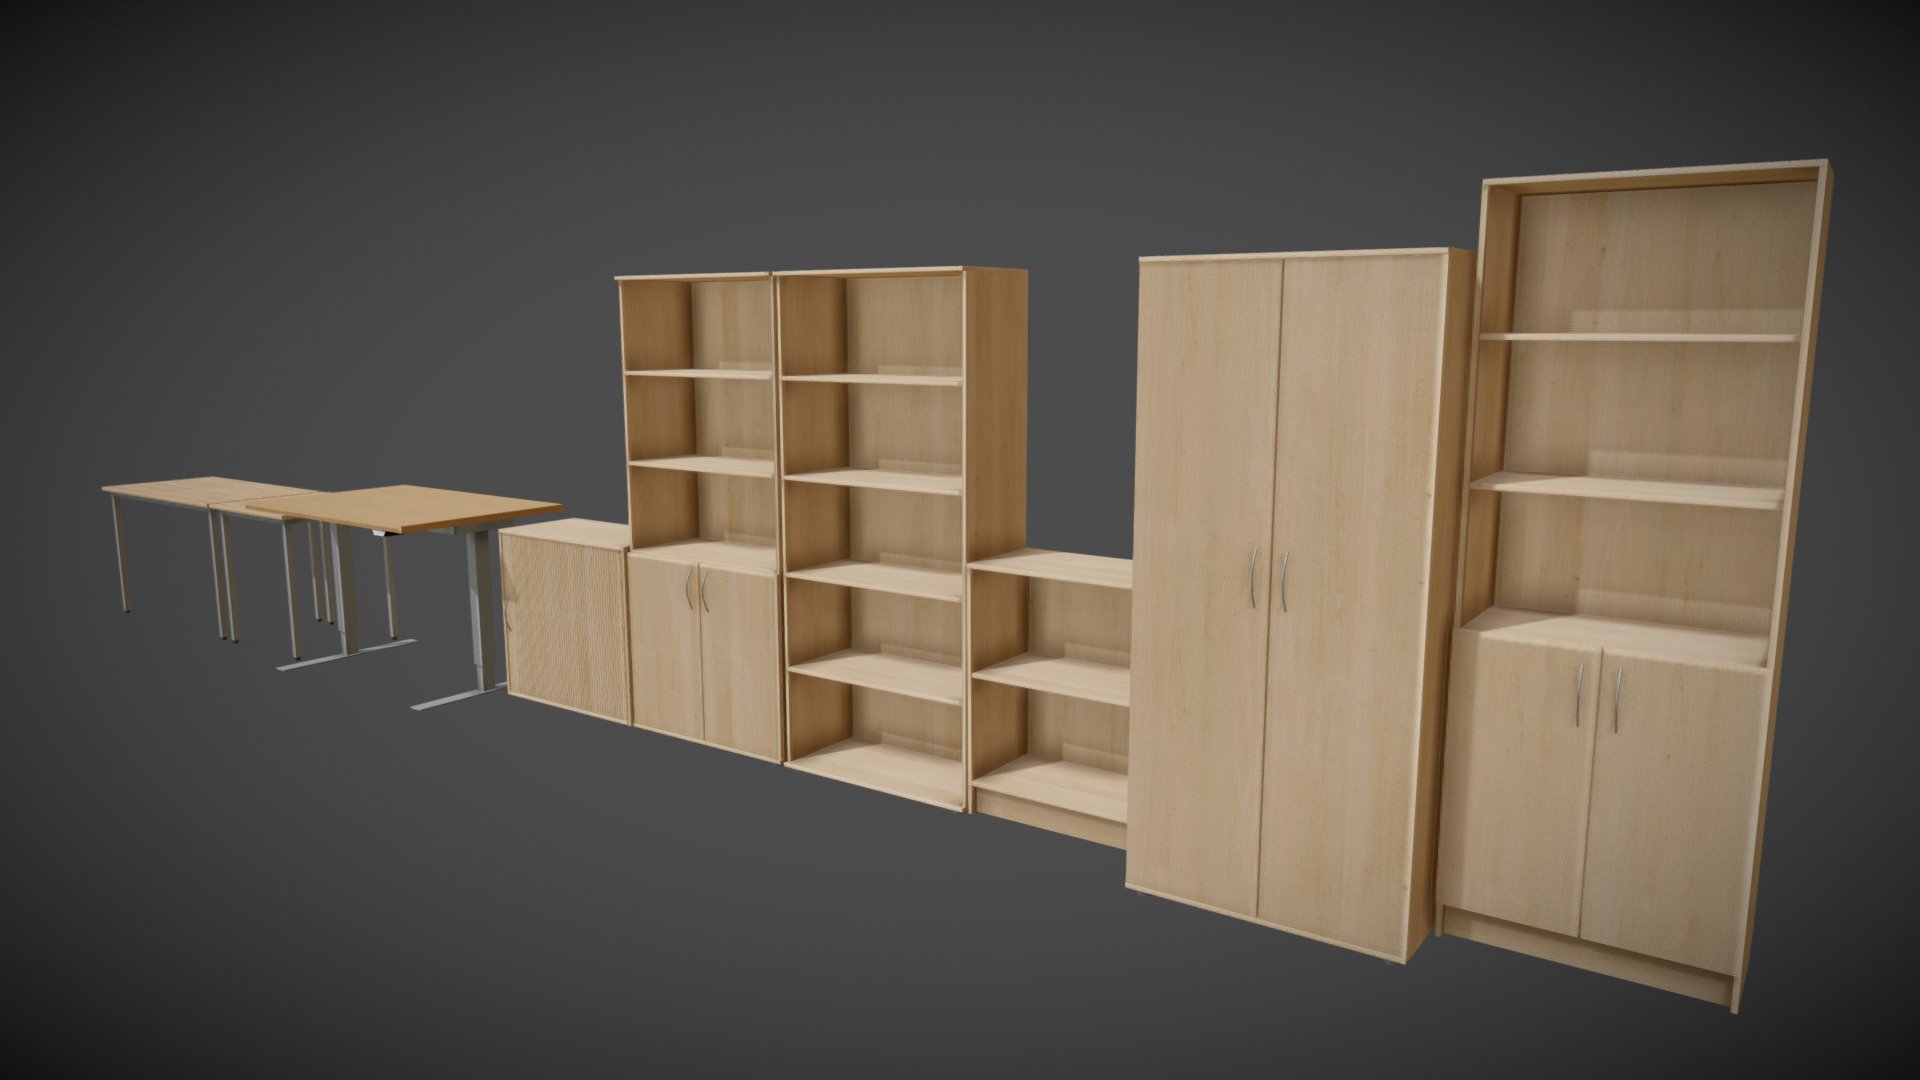 Various game-ready office shelves, closets, cabinets and tables.
Contains PBR textures, as well as Unity mask texture (RGBA -&gt; Metalness, AO, Roughness, Smoothness) and uses 1 material.

Modeled in Blender, textured in Substance Painter 3d model